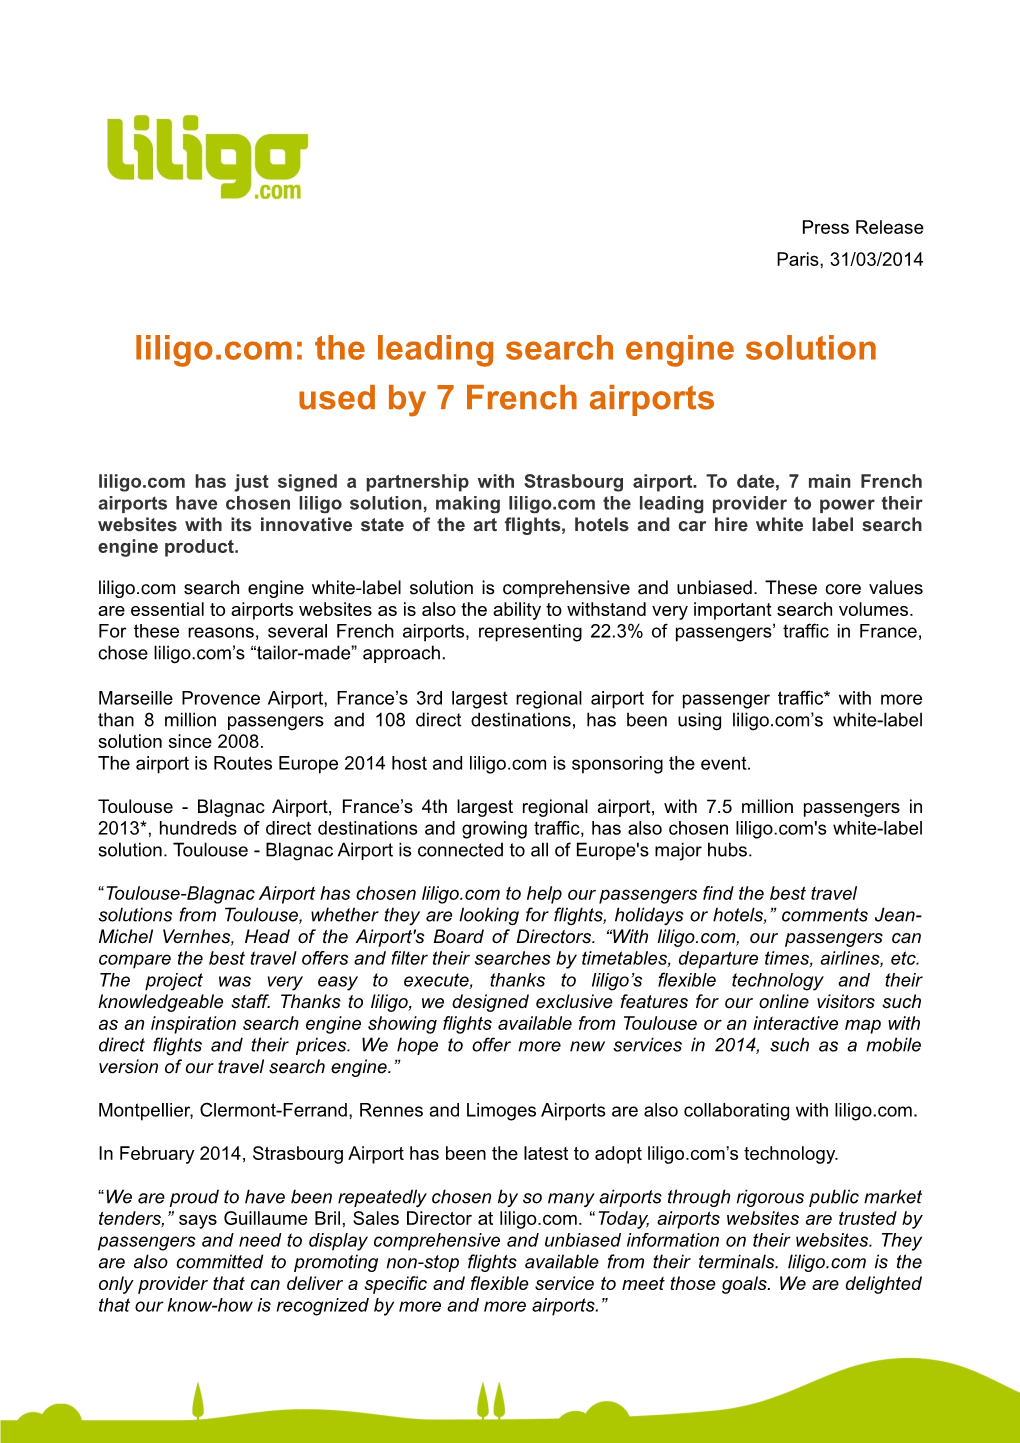 The Leading Search Engine Solution Used by 7 French Airports Liligo.Com Has Just Signed a Partnership with Strasbourg Airport